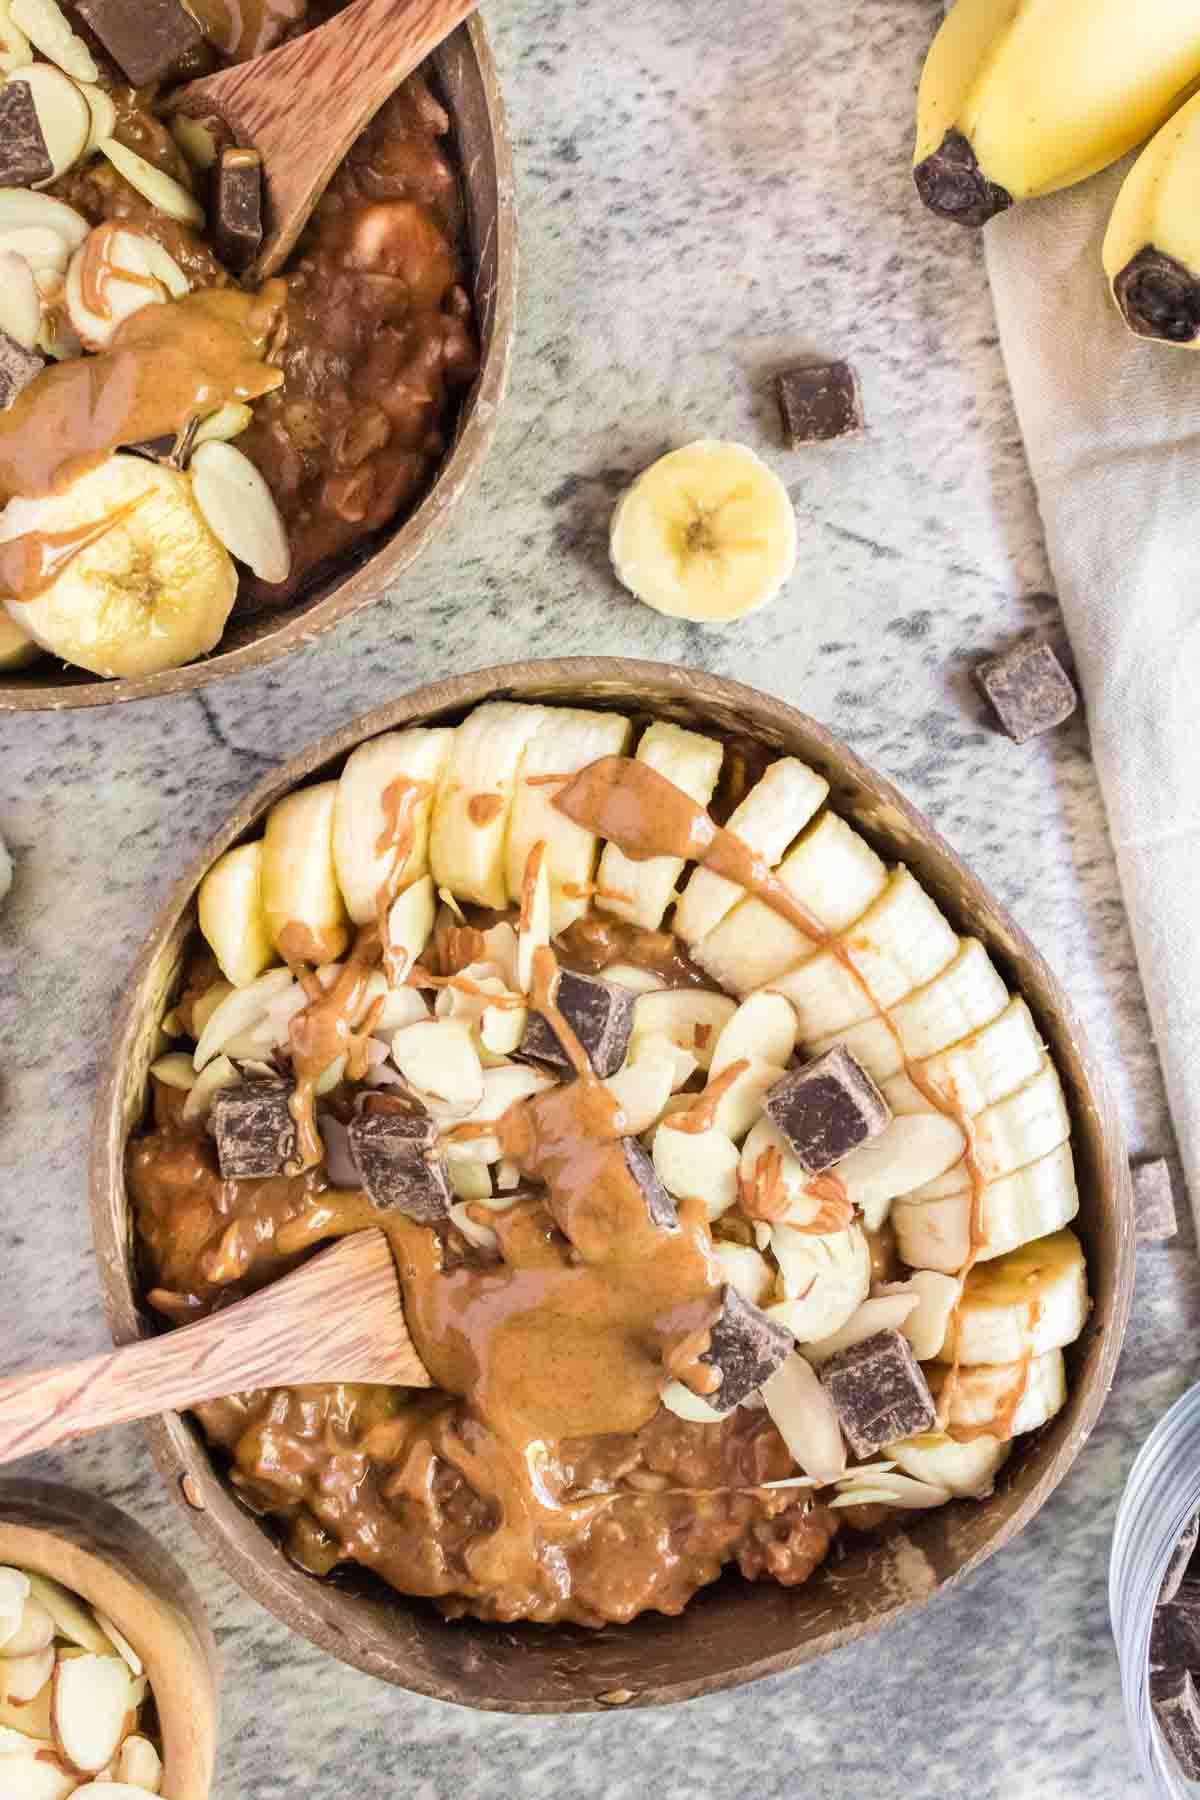 A bowl of Almond Butter Chocolate Oatmeal with banana slices, chopped almonds, chocolate chunks and melted almond butter.